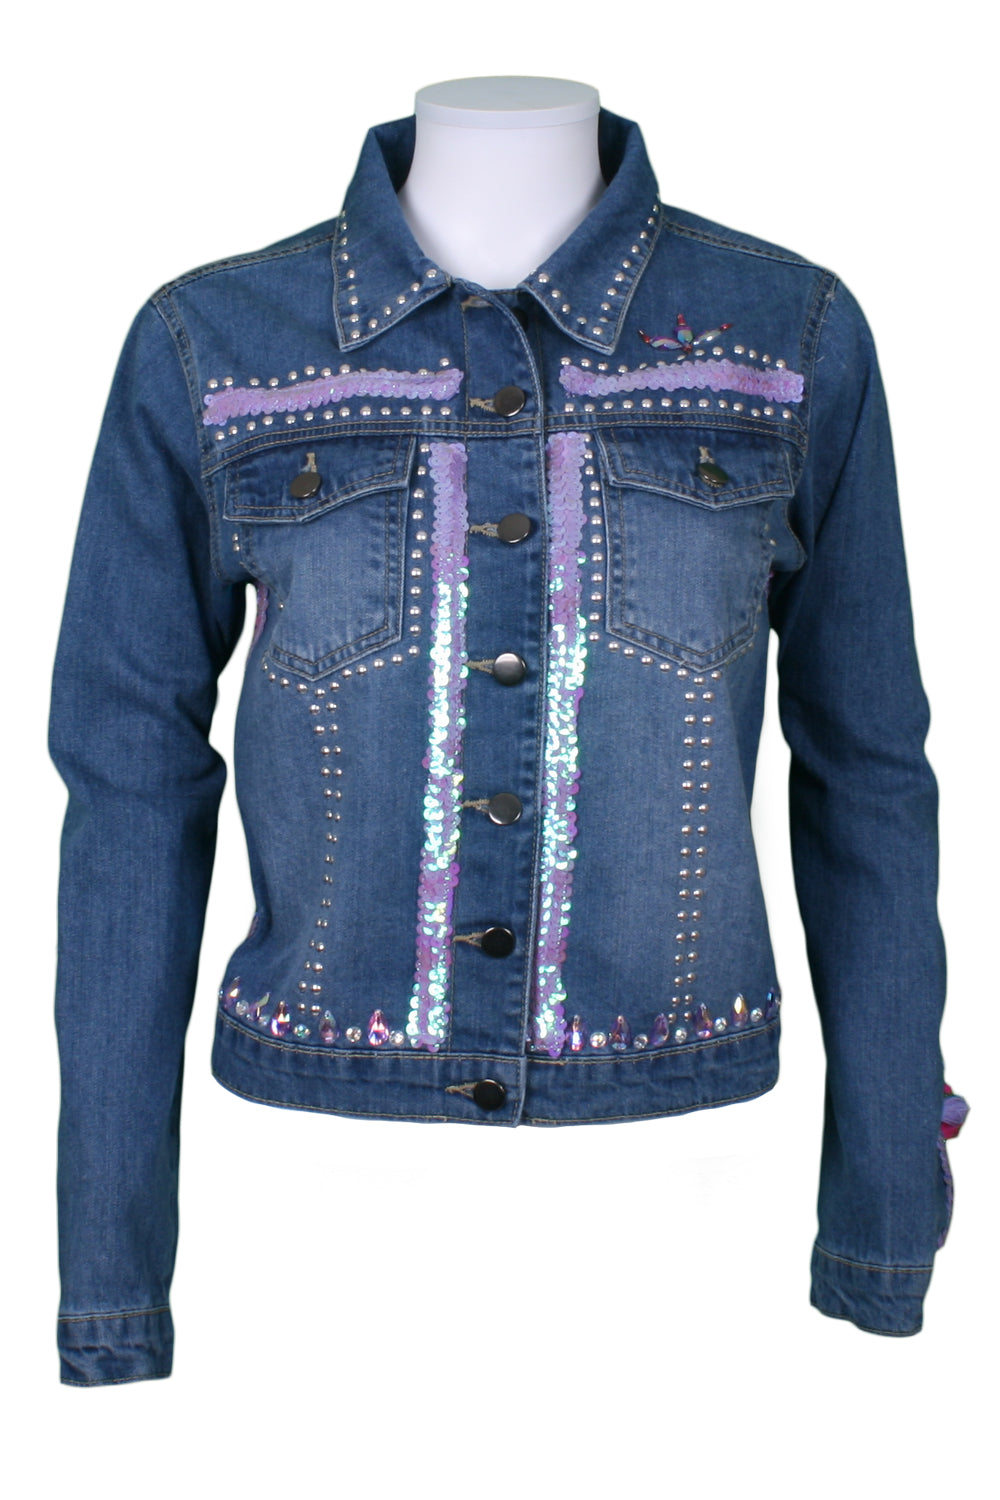 Studded denim jacket with sequins and sleeves – Jukebox Fashion